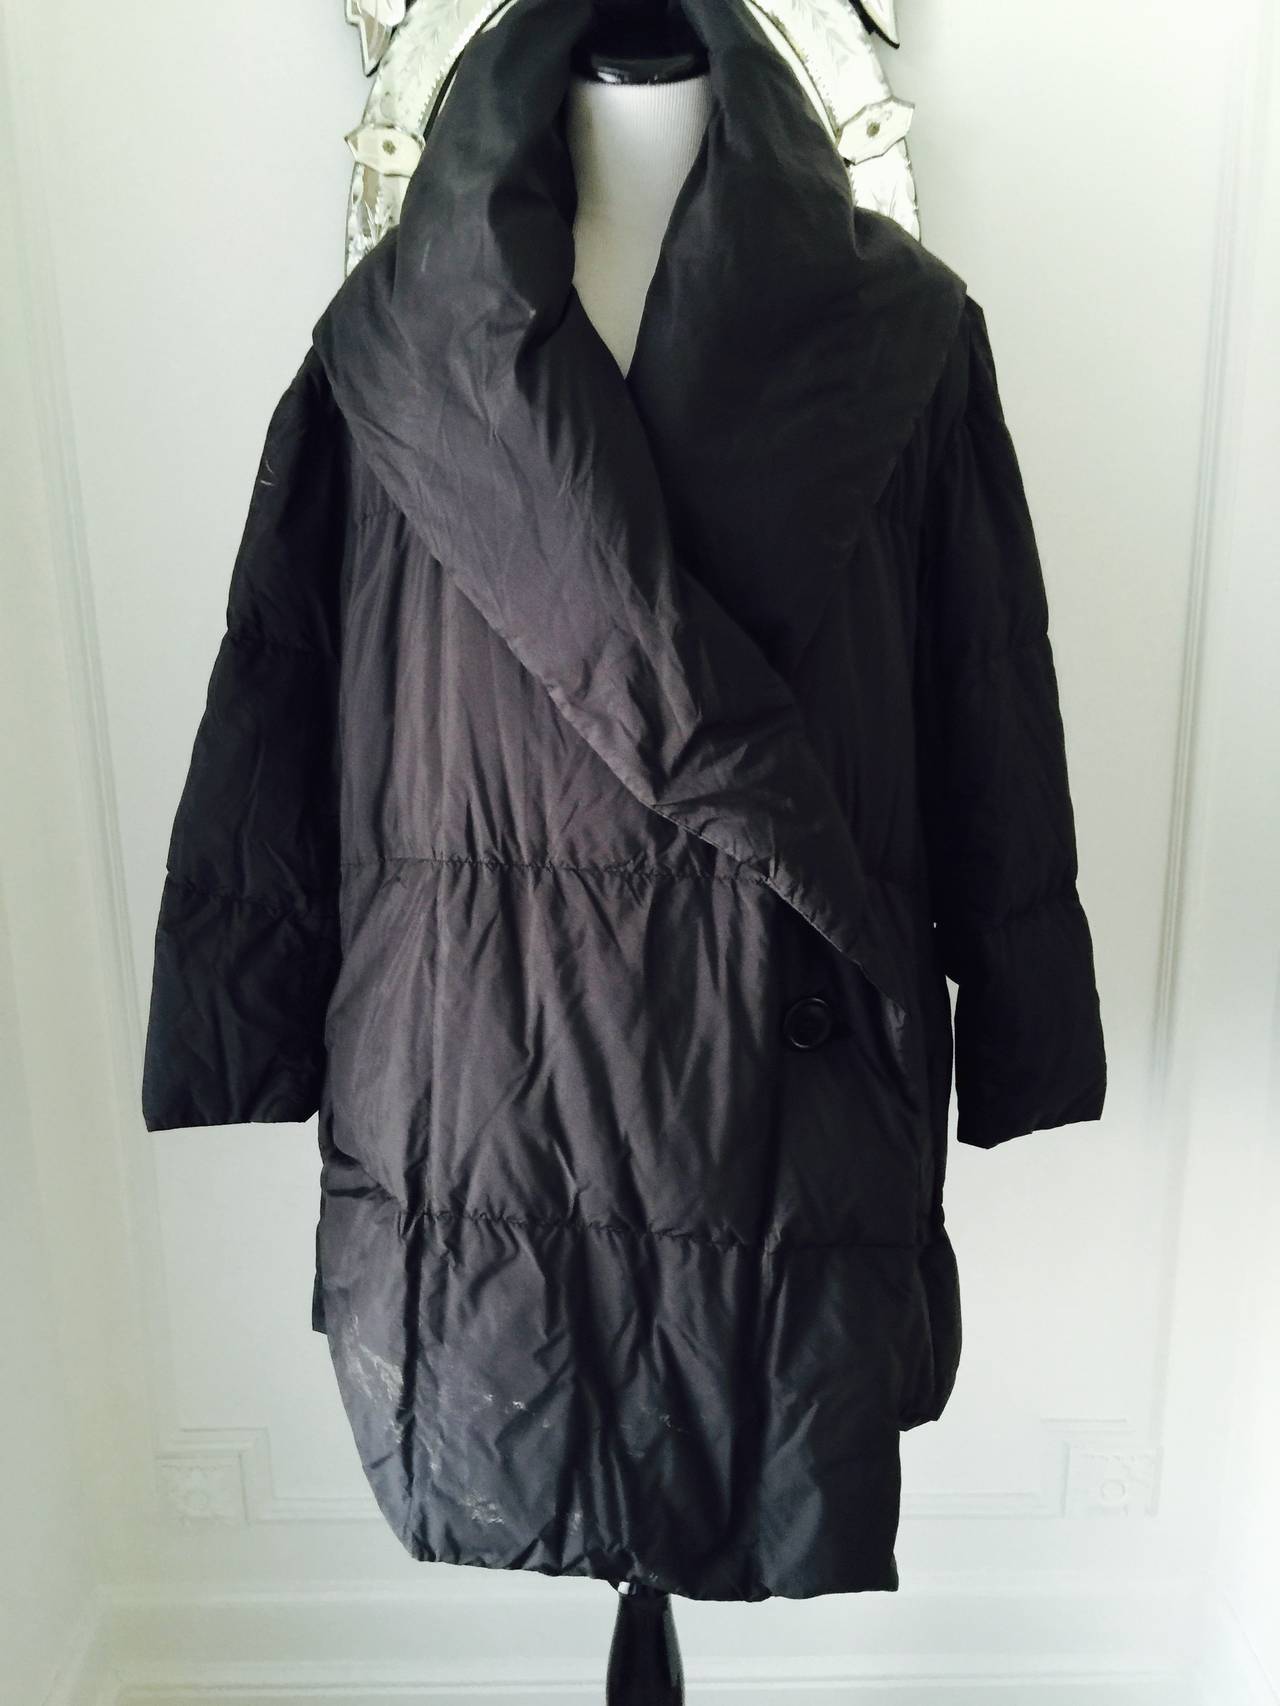 This is a perfect cozy and elegant nylon dawn jacket...
light weight ...2 button closure,,,big collar can dubbel up as hood...
Wrap yourself up in this wonderful jacket...although size in garment is S.
it fits more like a M/L